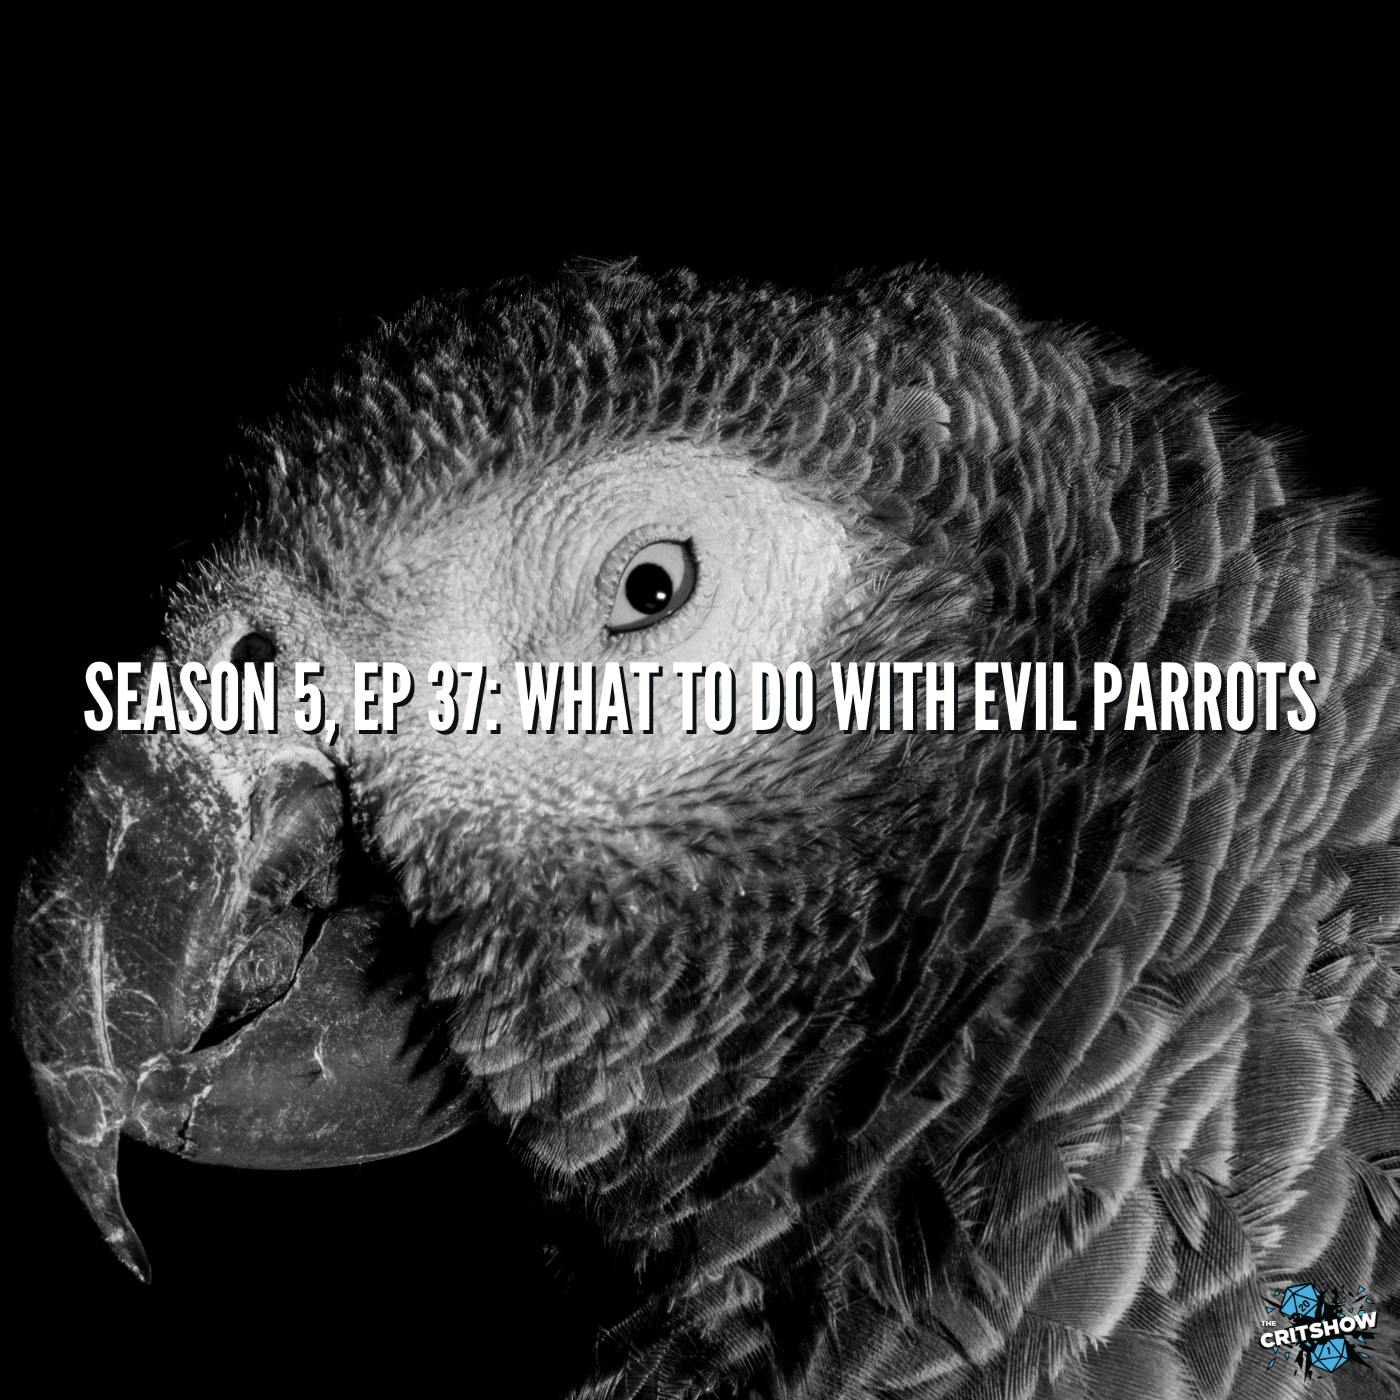 What To Do With Evil Parrots (S5, E37)